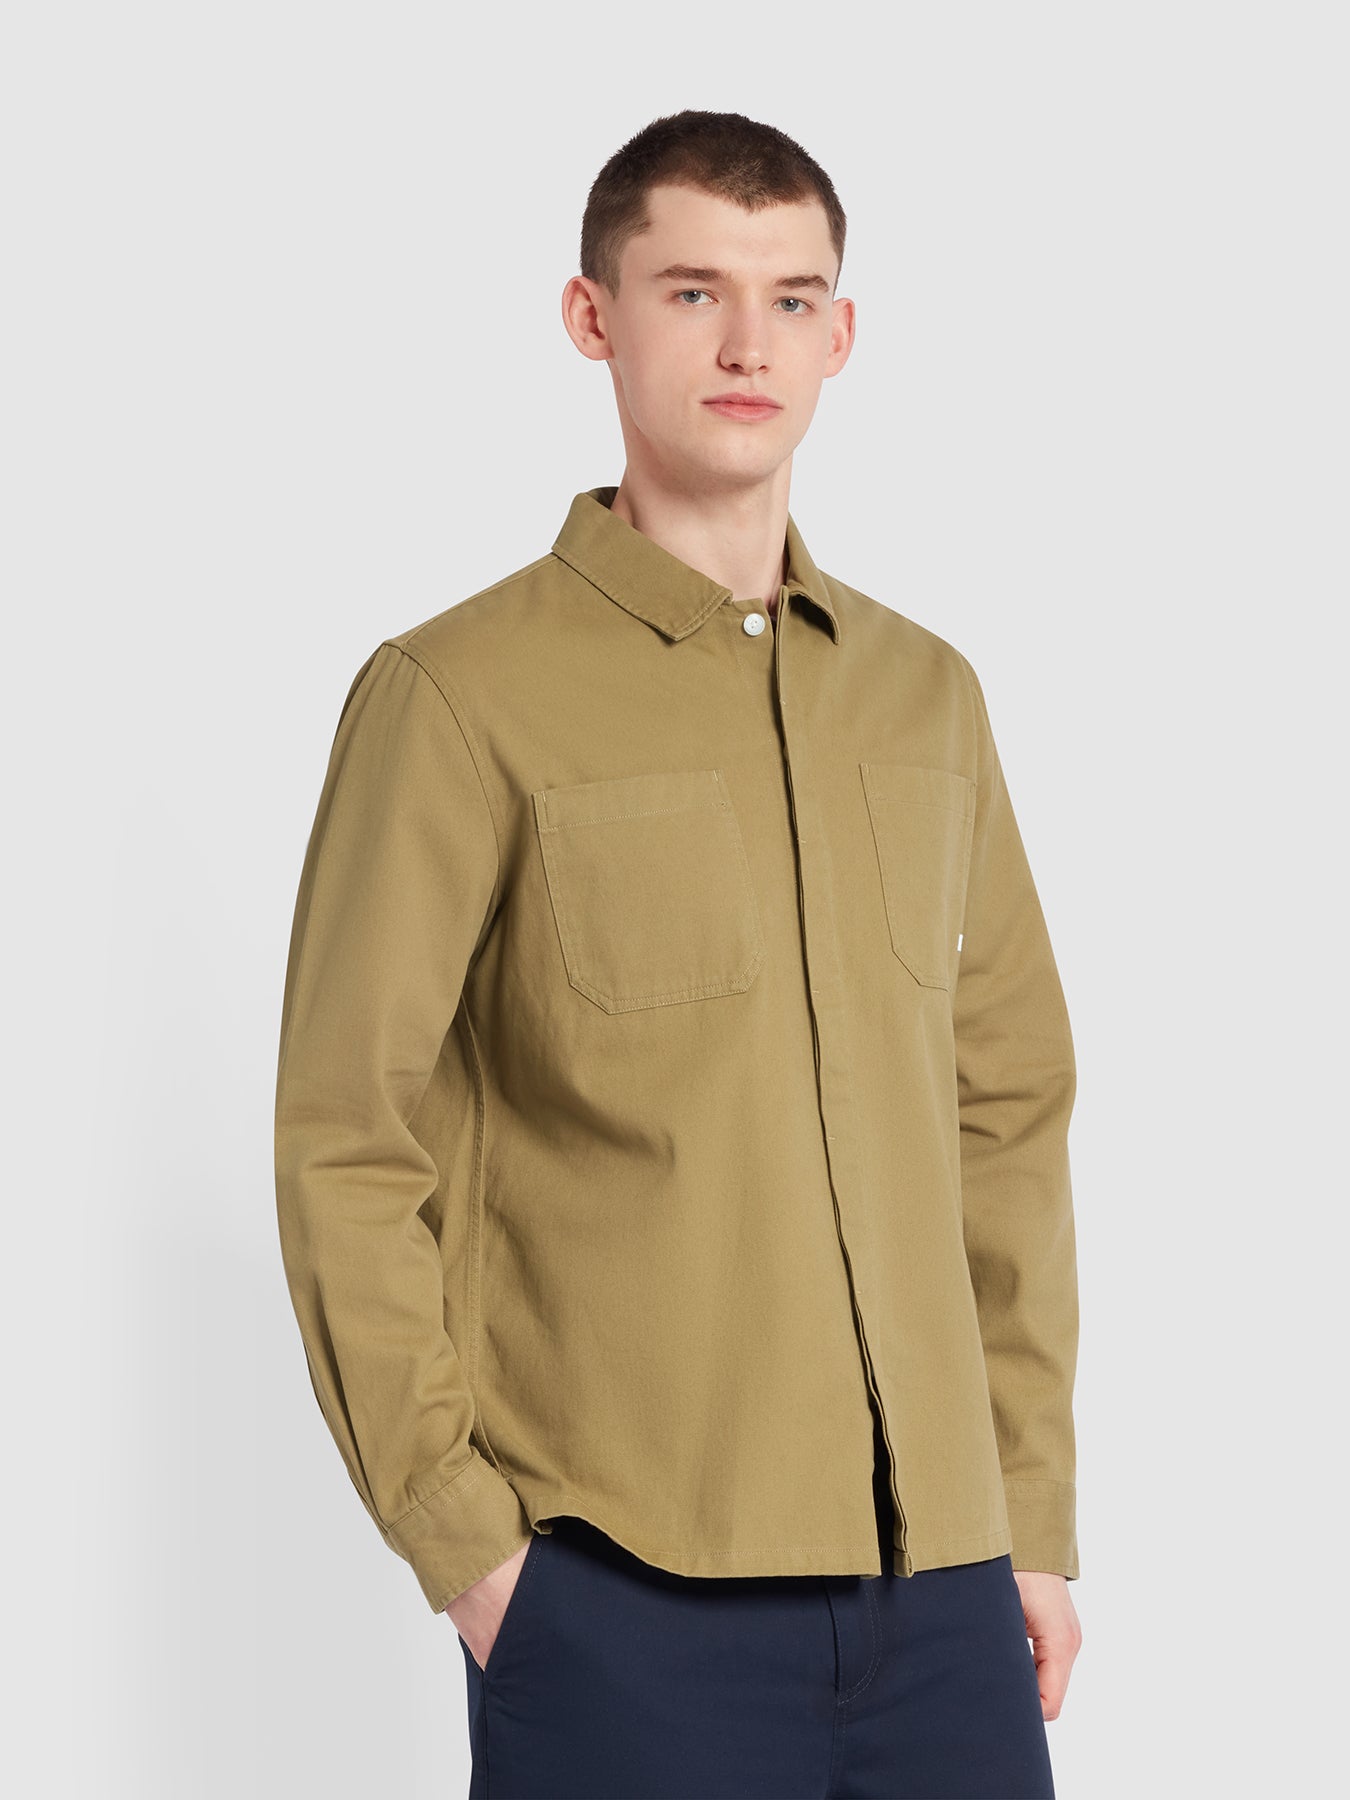 View Leon Relaxed Fit Overshirt In True Khaki information